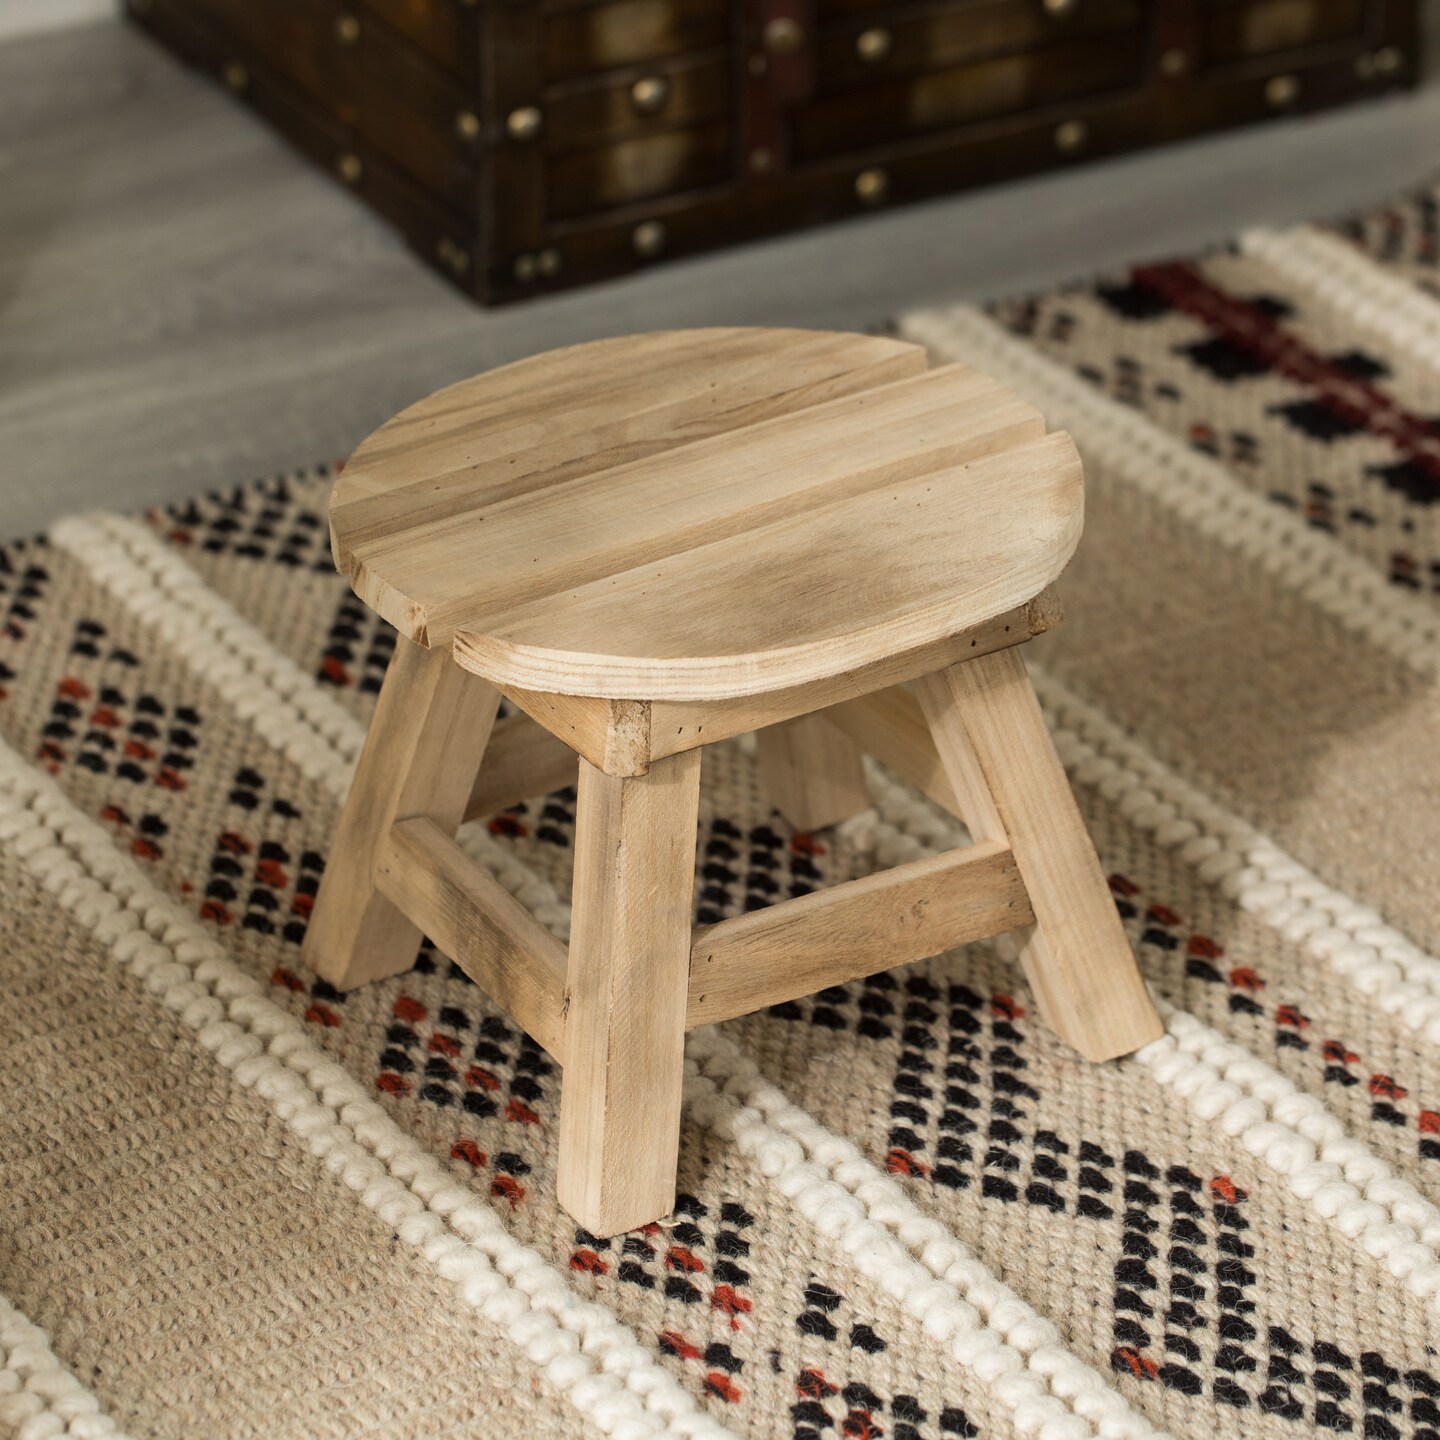 Decorative Antique Wood Style Natural Wooden Accent Stool for Indoor and Outdoor